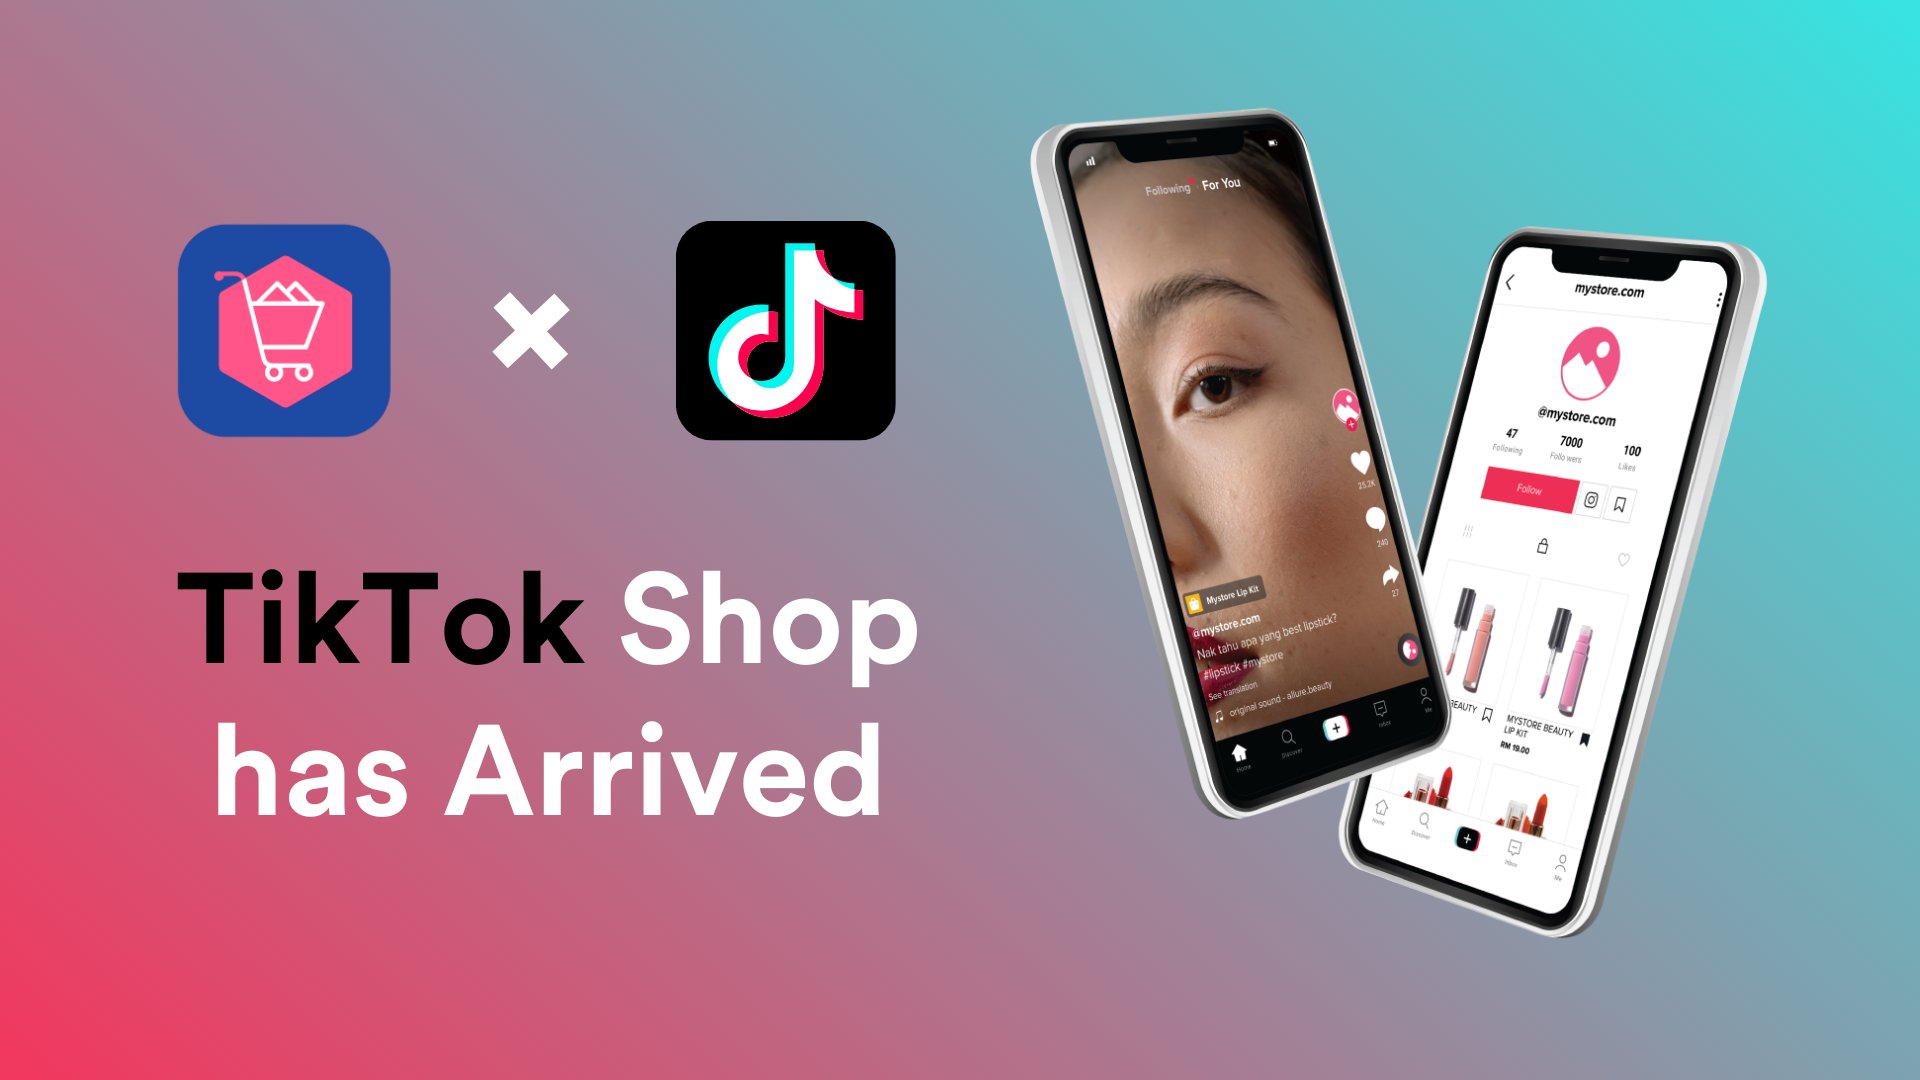 The integration of a shopping feature with TikTok, as depicted by app icons and mobile screens showcasing products